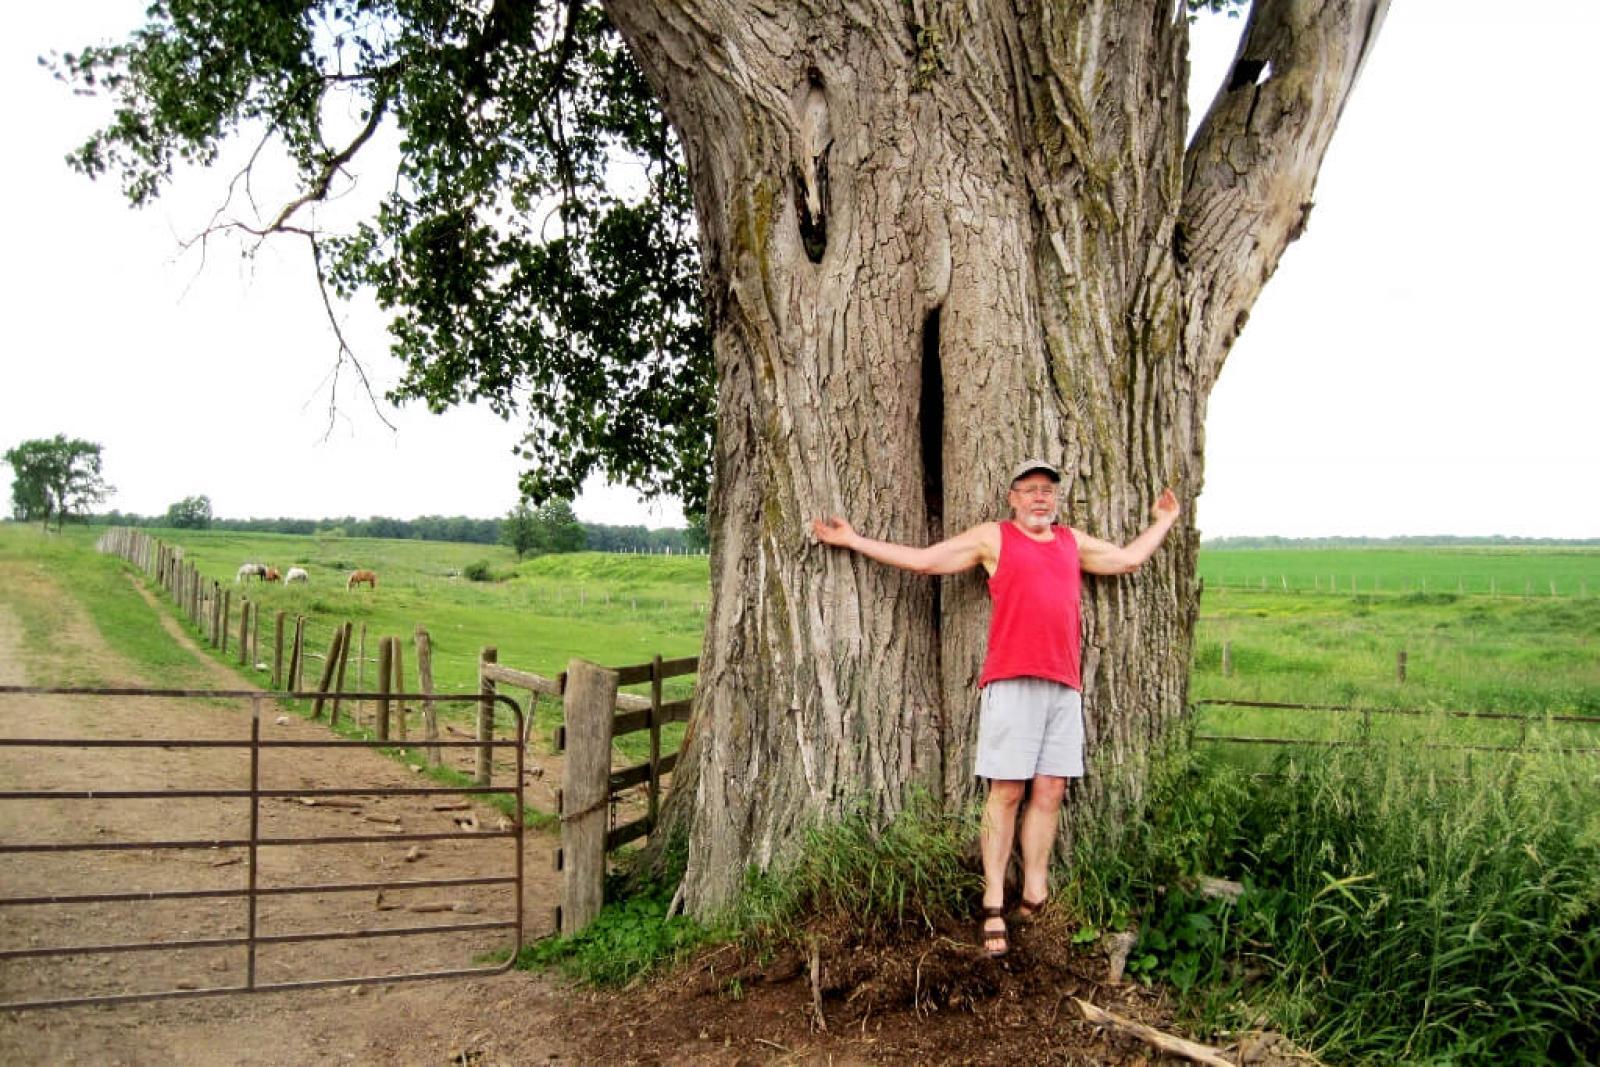 Peter Weber can’t completely hug this giant eastern cottonwood.